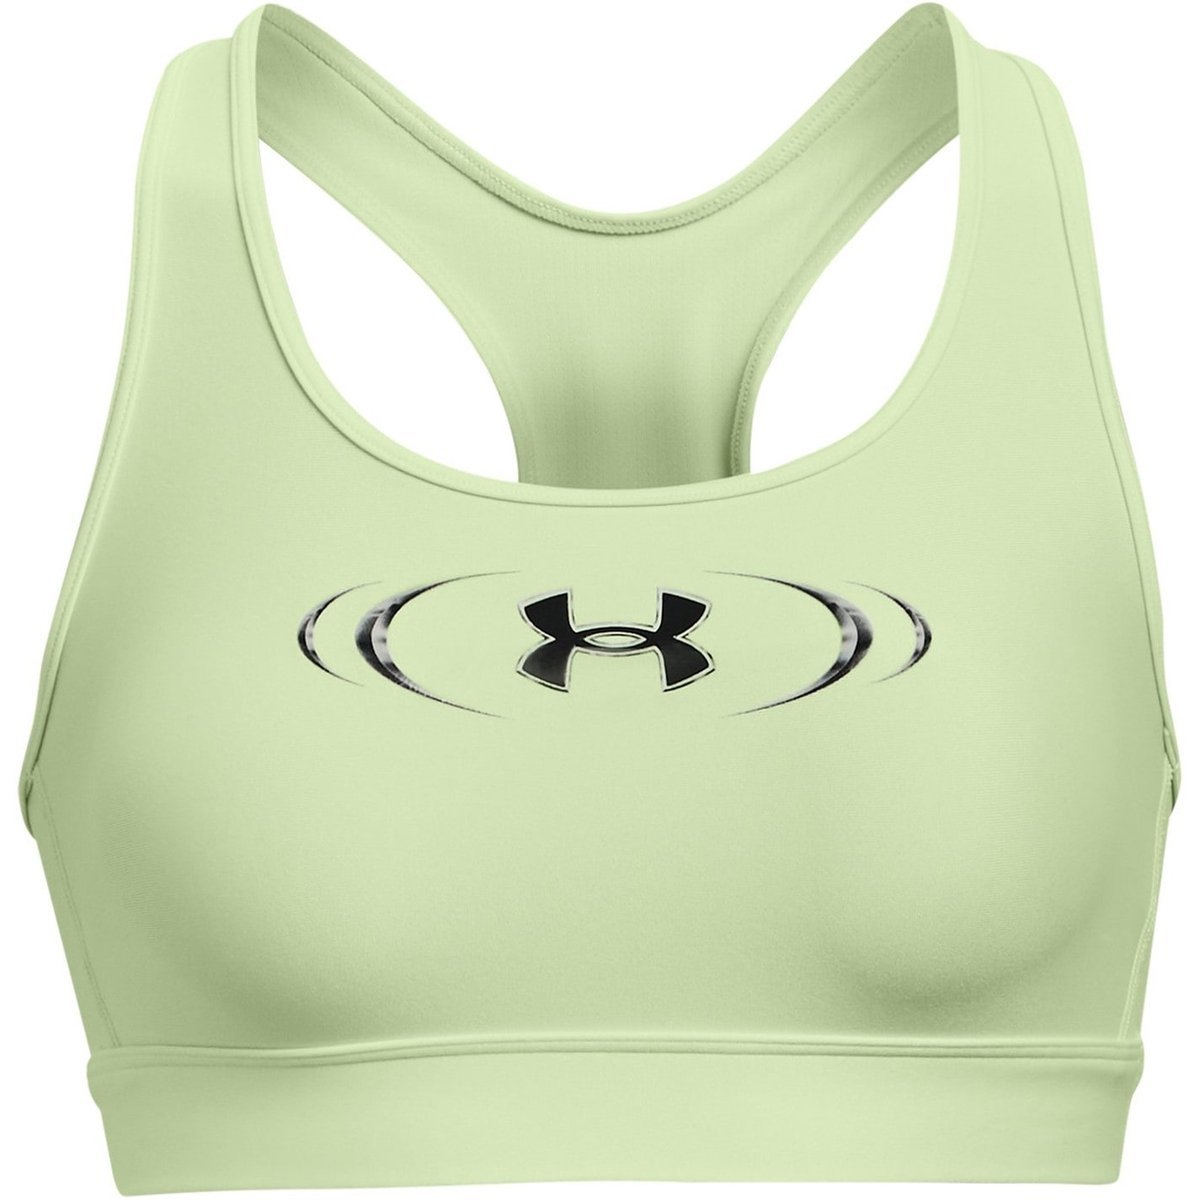  Under Armour Women's Armour Eclipse High Impact Sports Bra,  Black /Metallic Silver, 32A : Clothing, Shoes & Jewelry